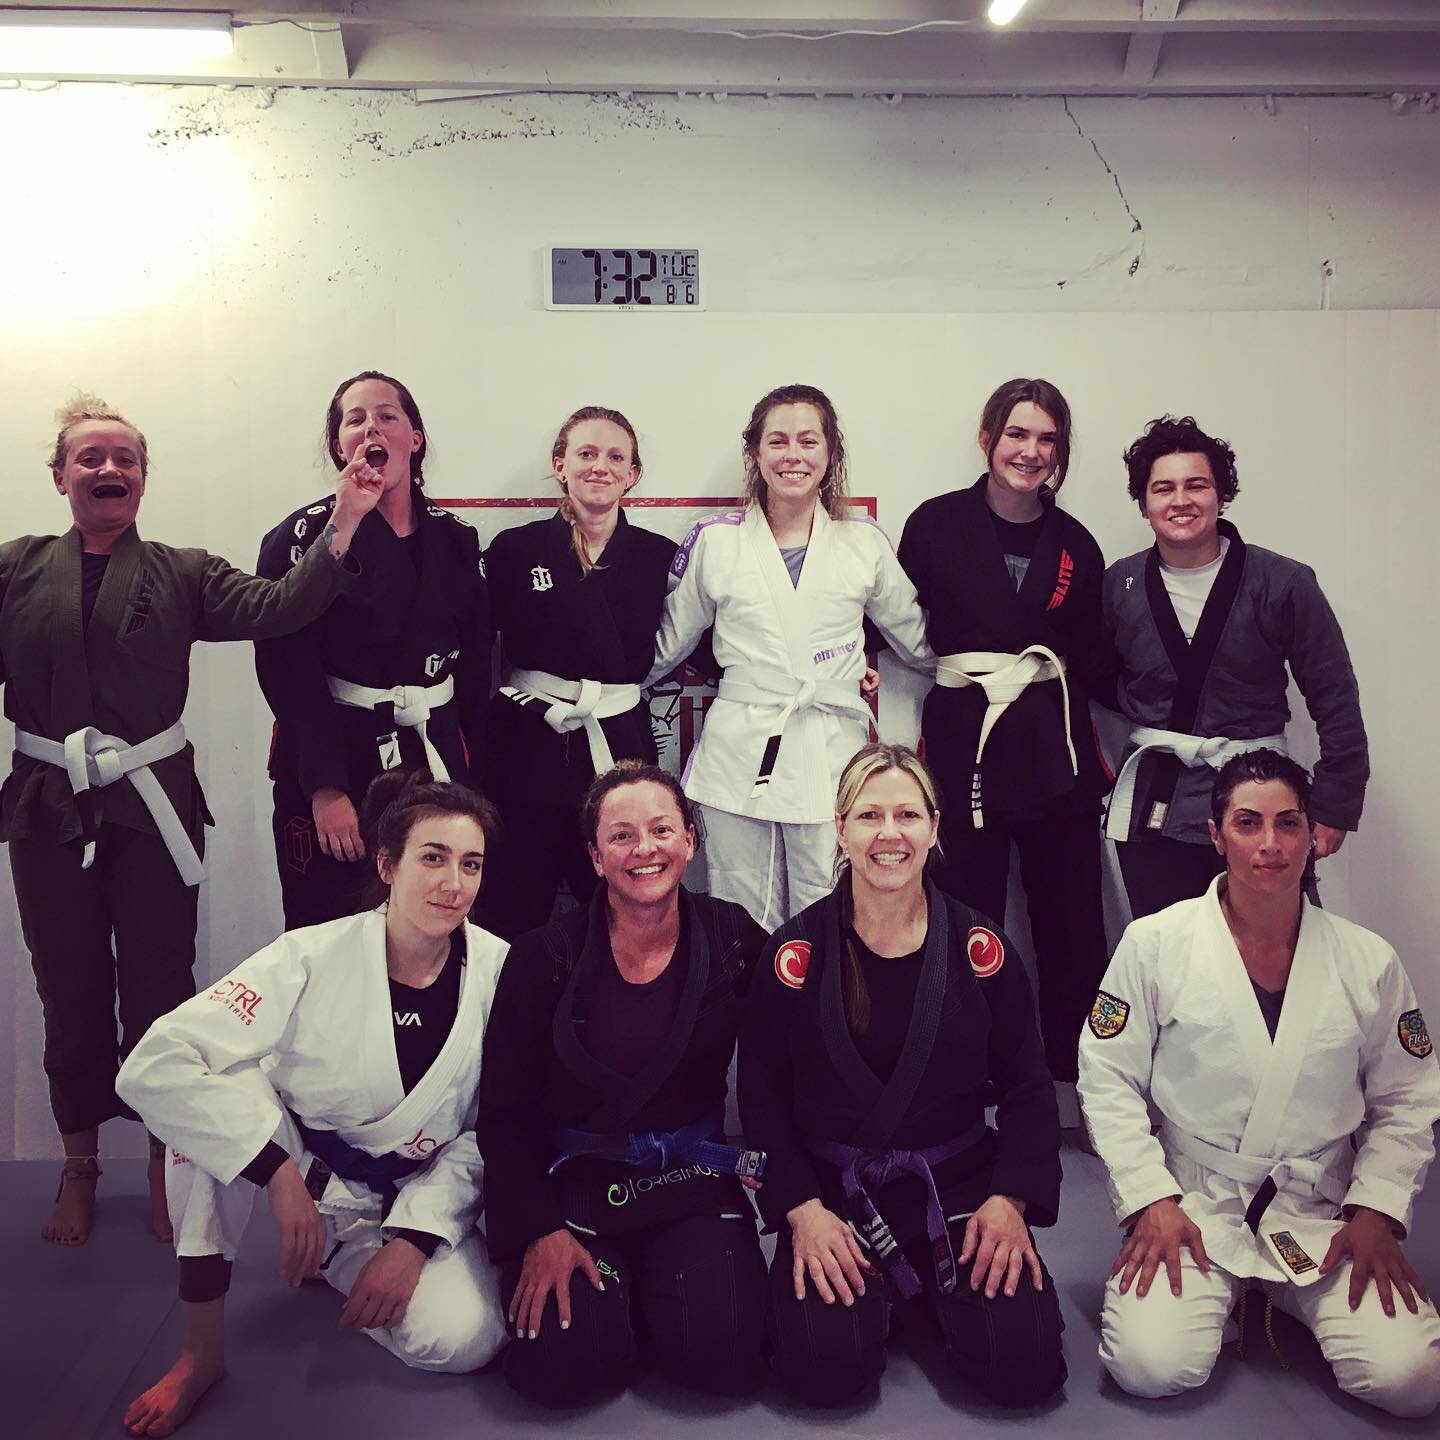 Women&rsquo;s class getting ready for #grapplingindustries and #naga. You can pick your friends and&hellip; some ankles. #bjj #jiujitsu #competition #hurricanejj #cle #cleveland #westpark